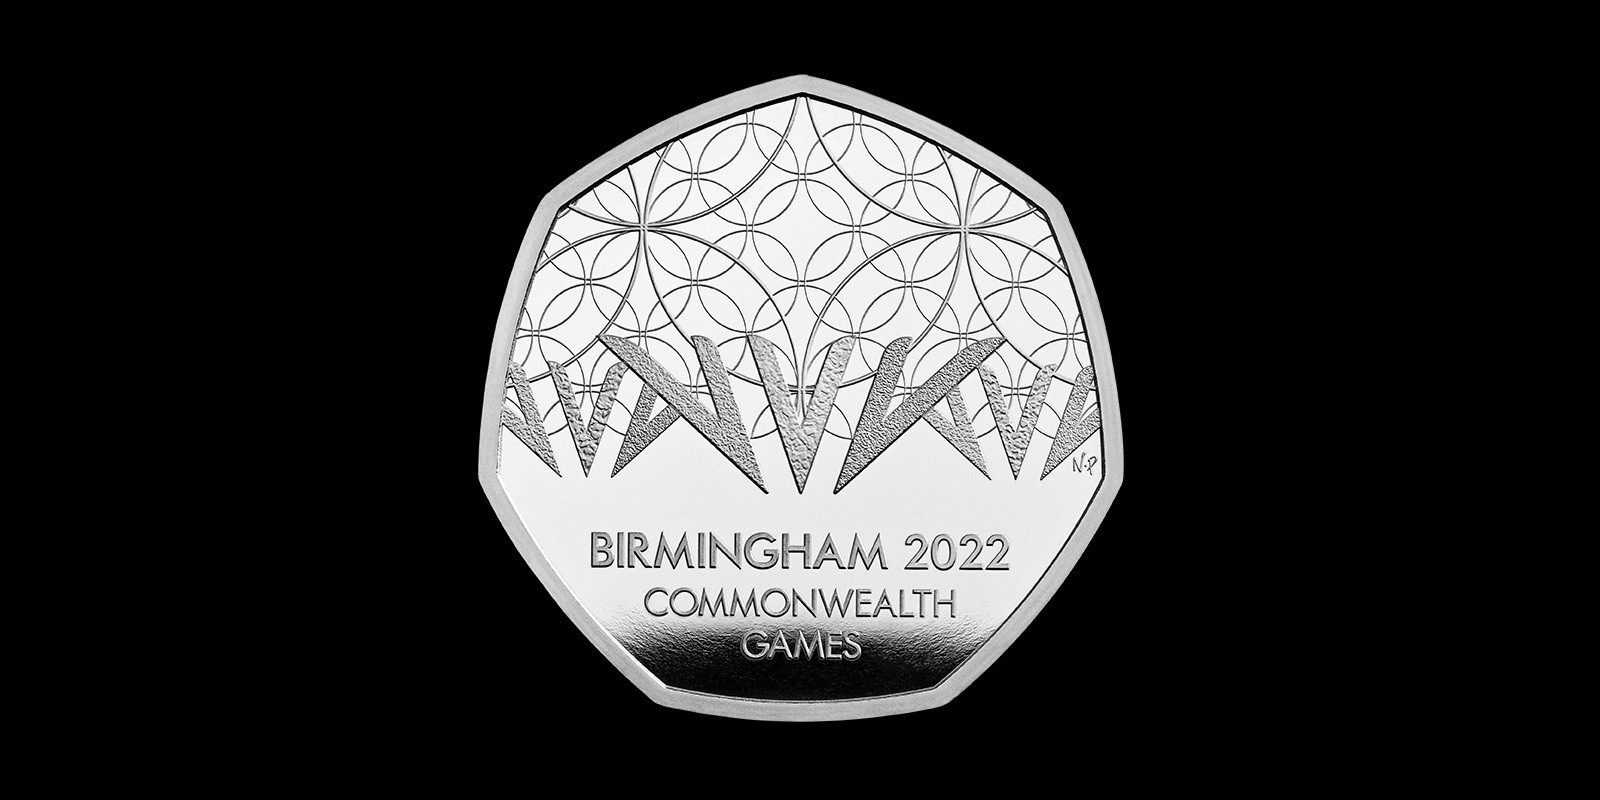 Royal Mint designs new coin to honour Birmingham 2022 Commonwealth Games